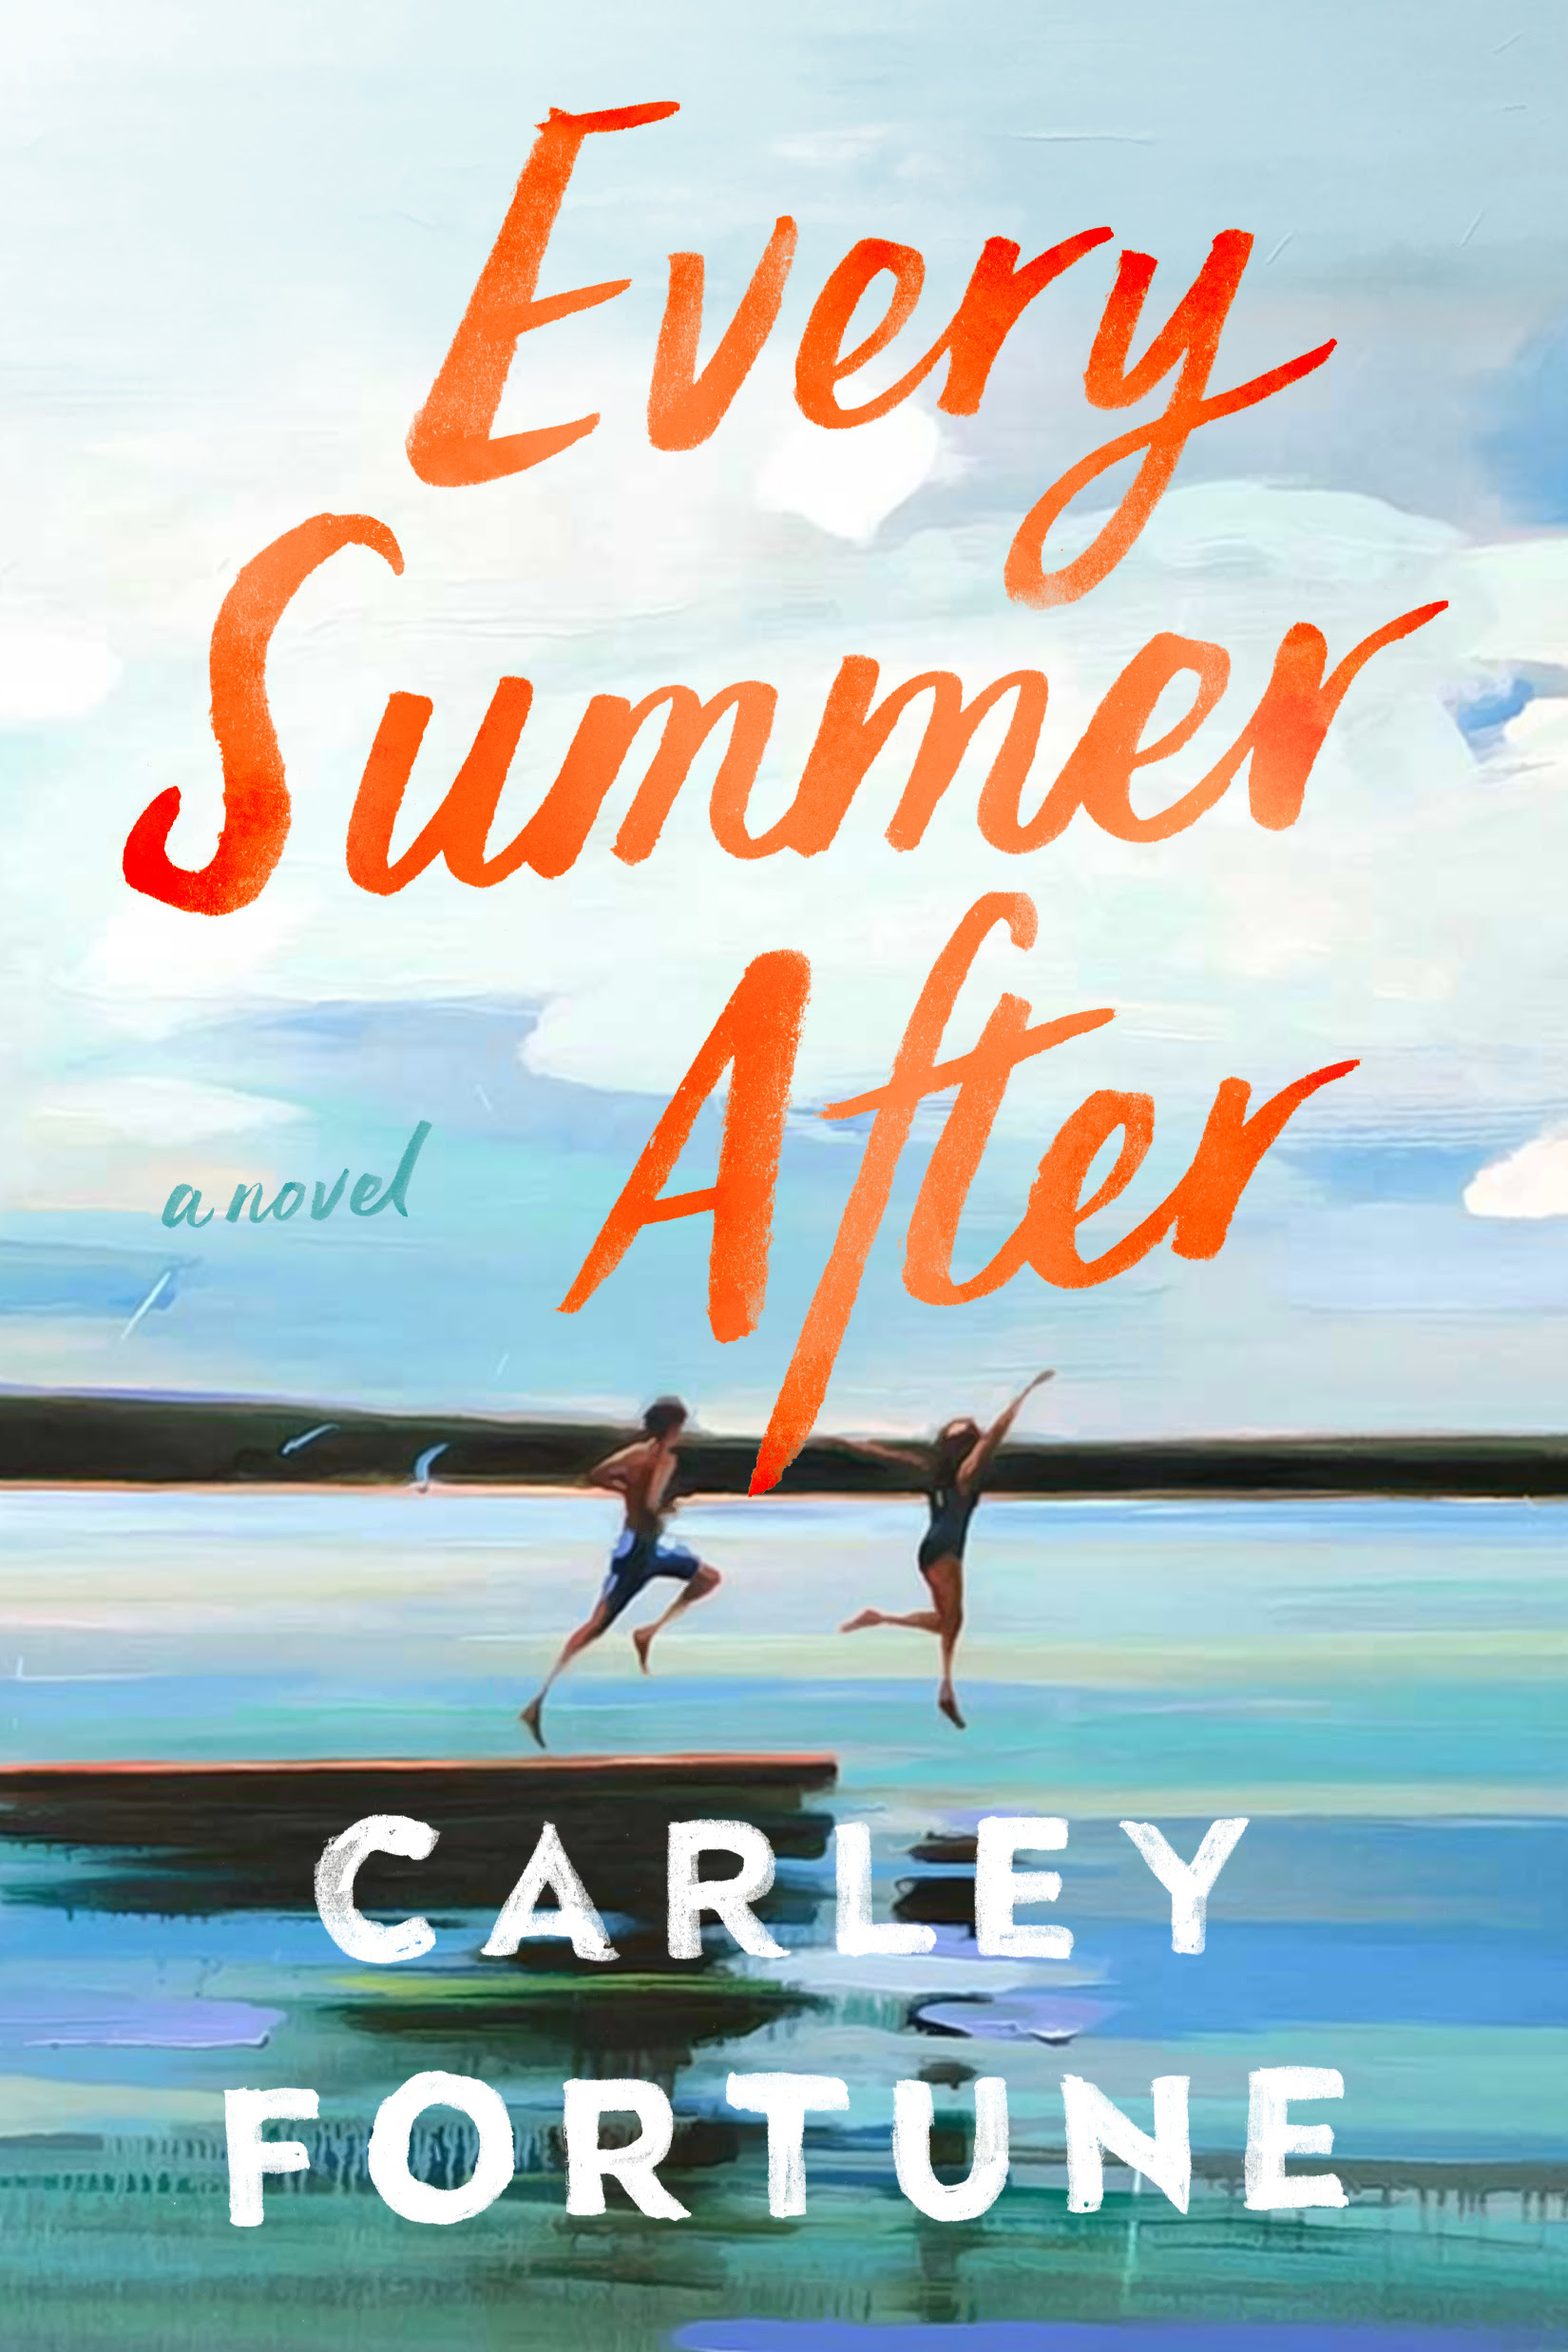 carley fortune author